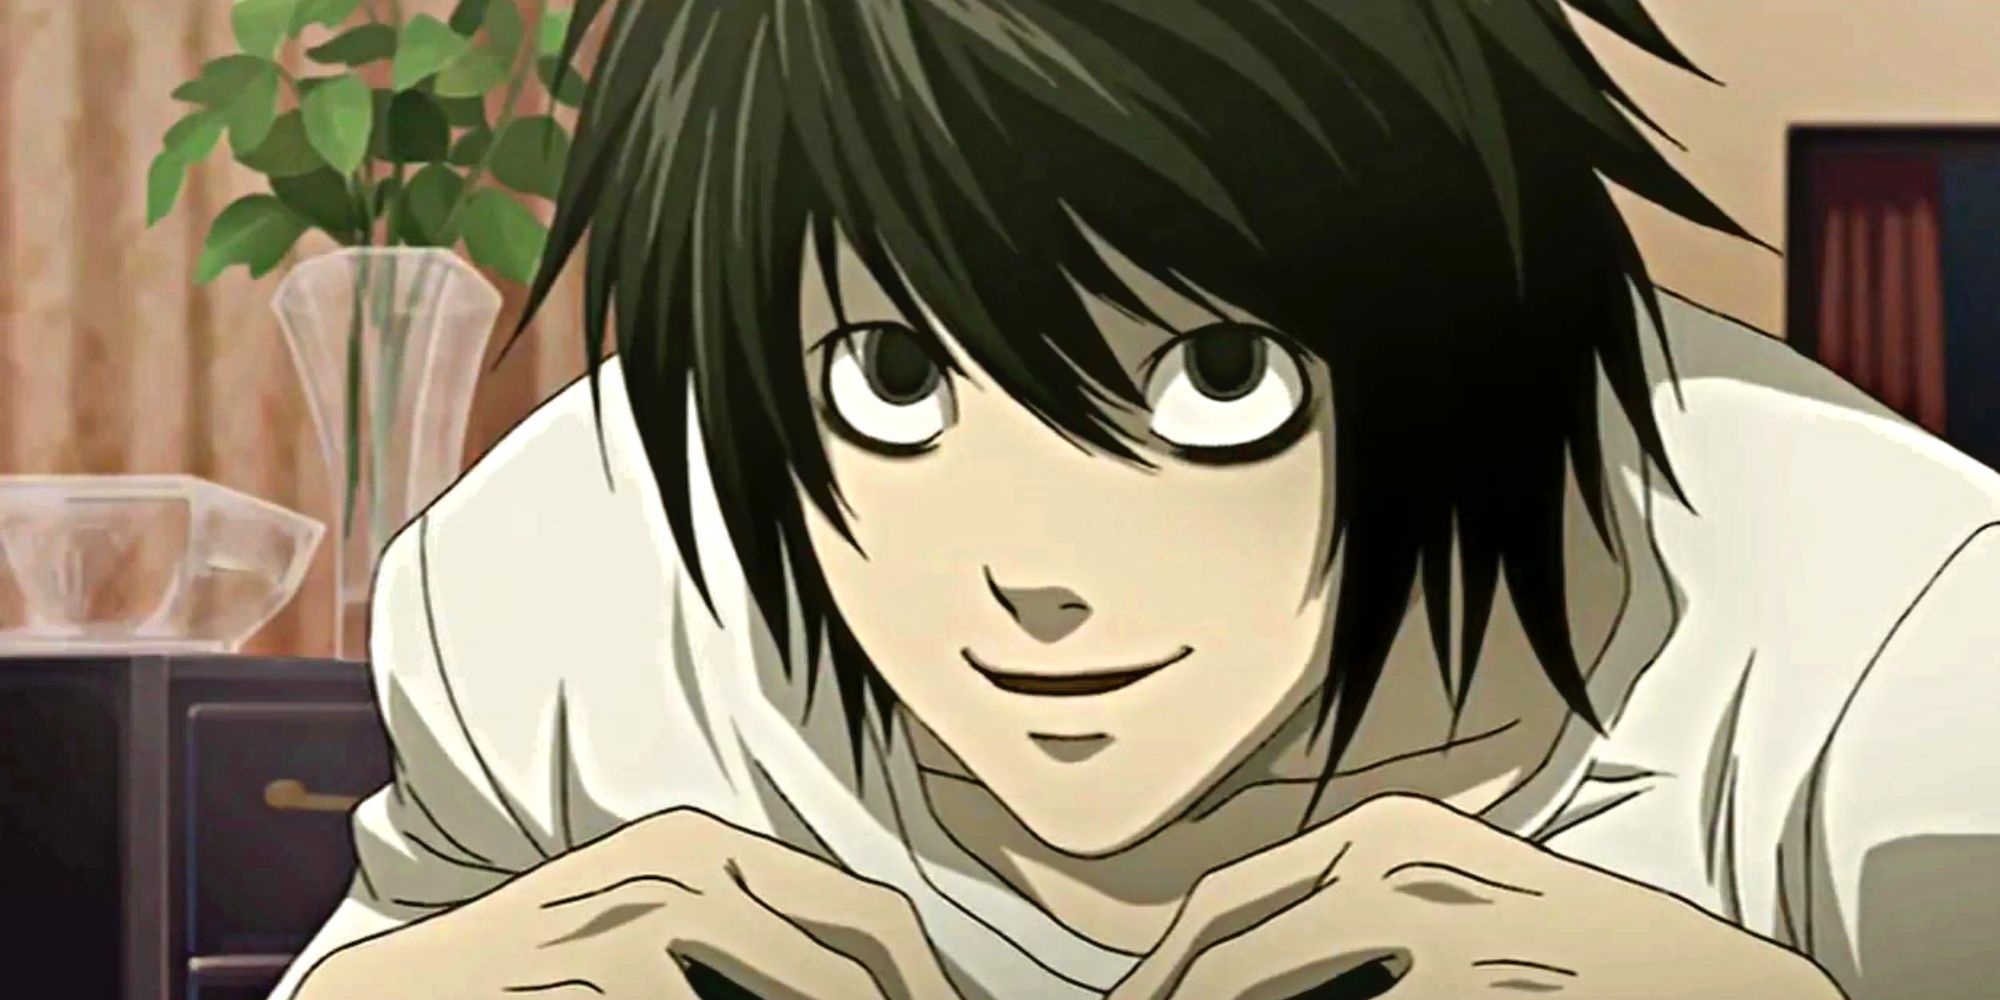 L Lawliet from Death Note smiles as he talks about Kira's capture.